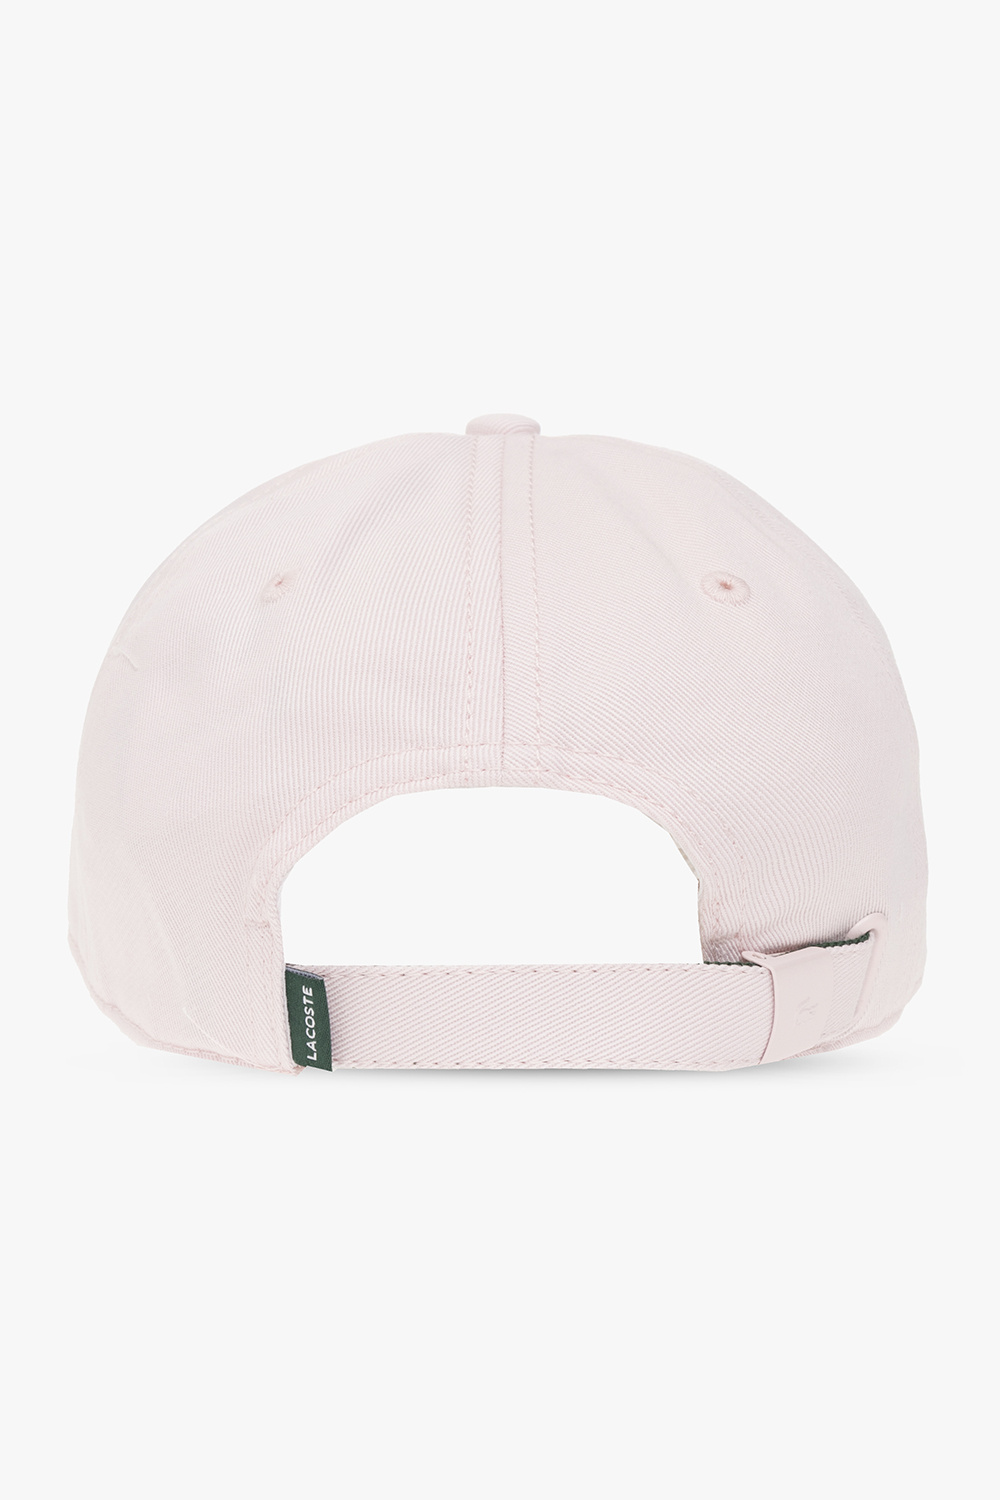 Serve Cap Japan IetpShops new Lacoste Serve with Lacoste logo and Pink a collaborated collection - atmos - on with